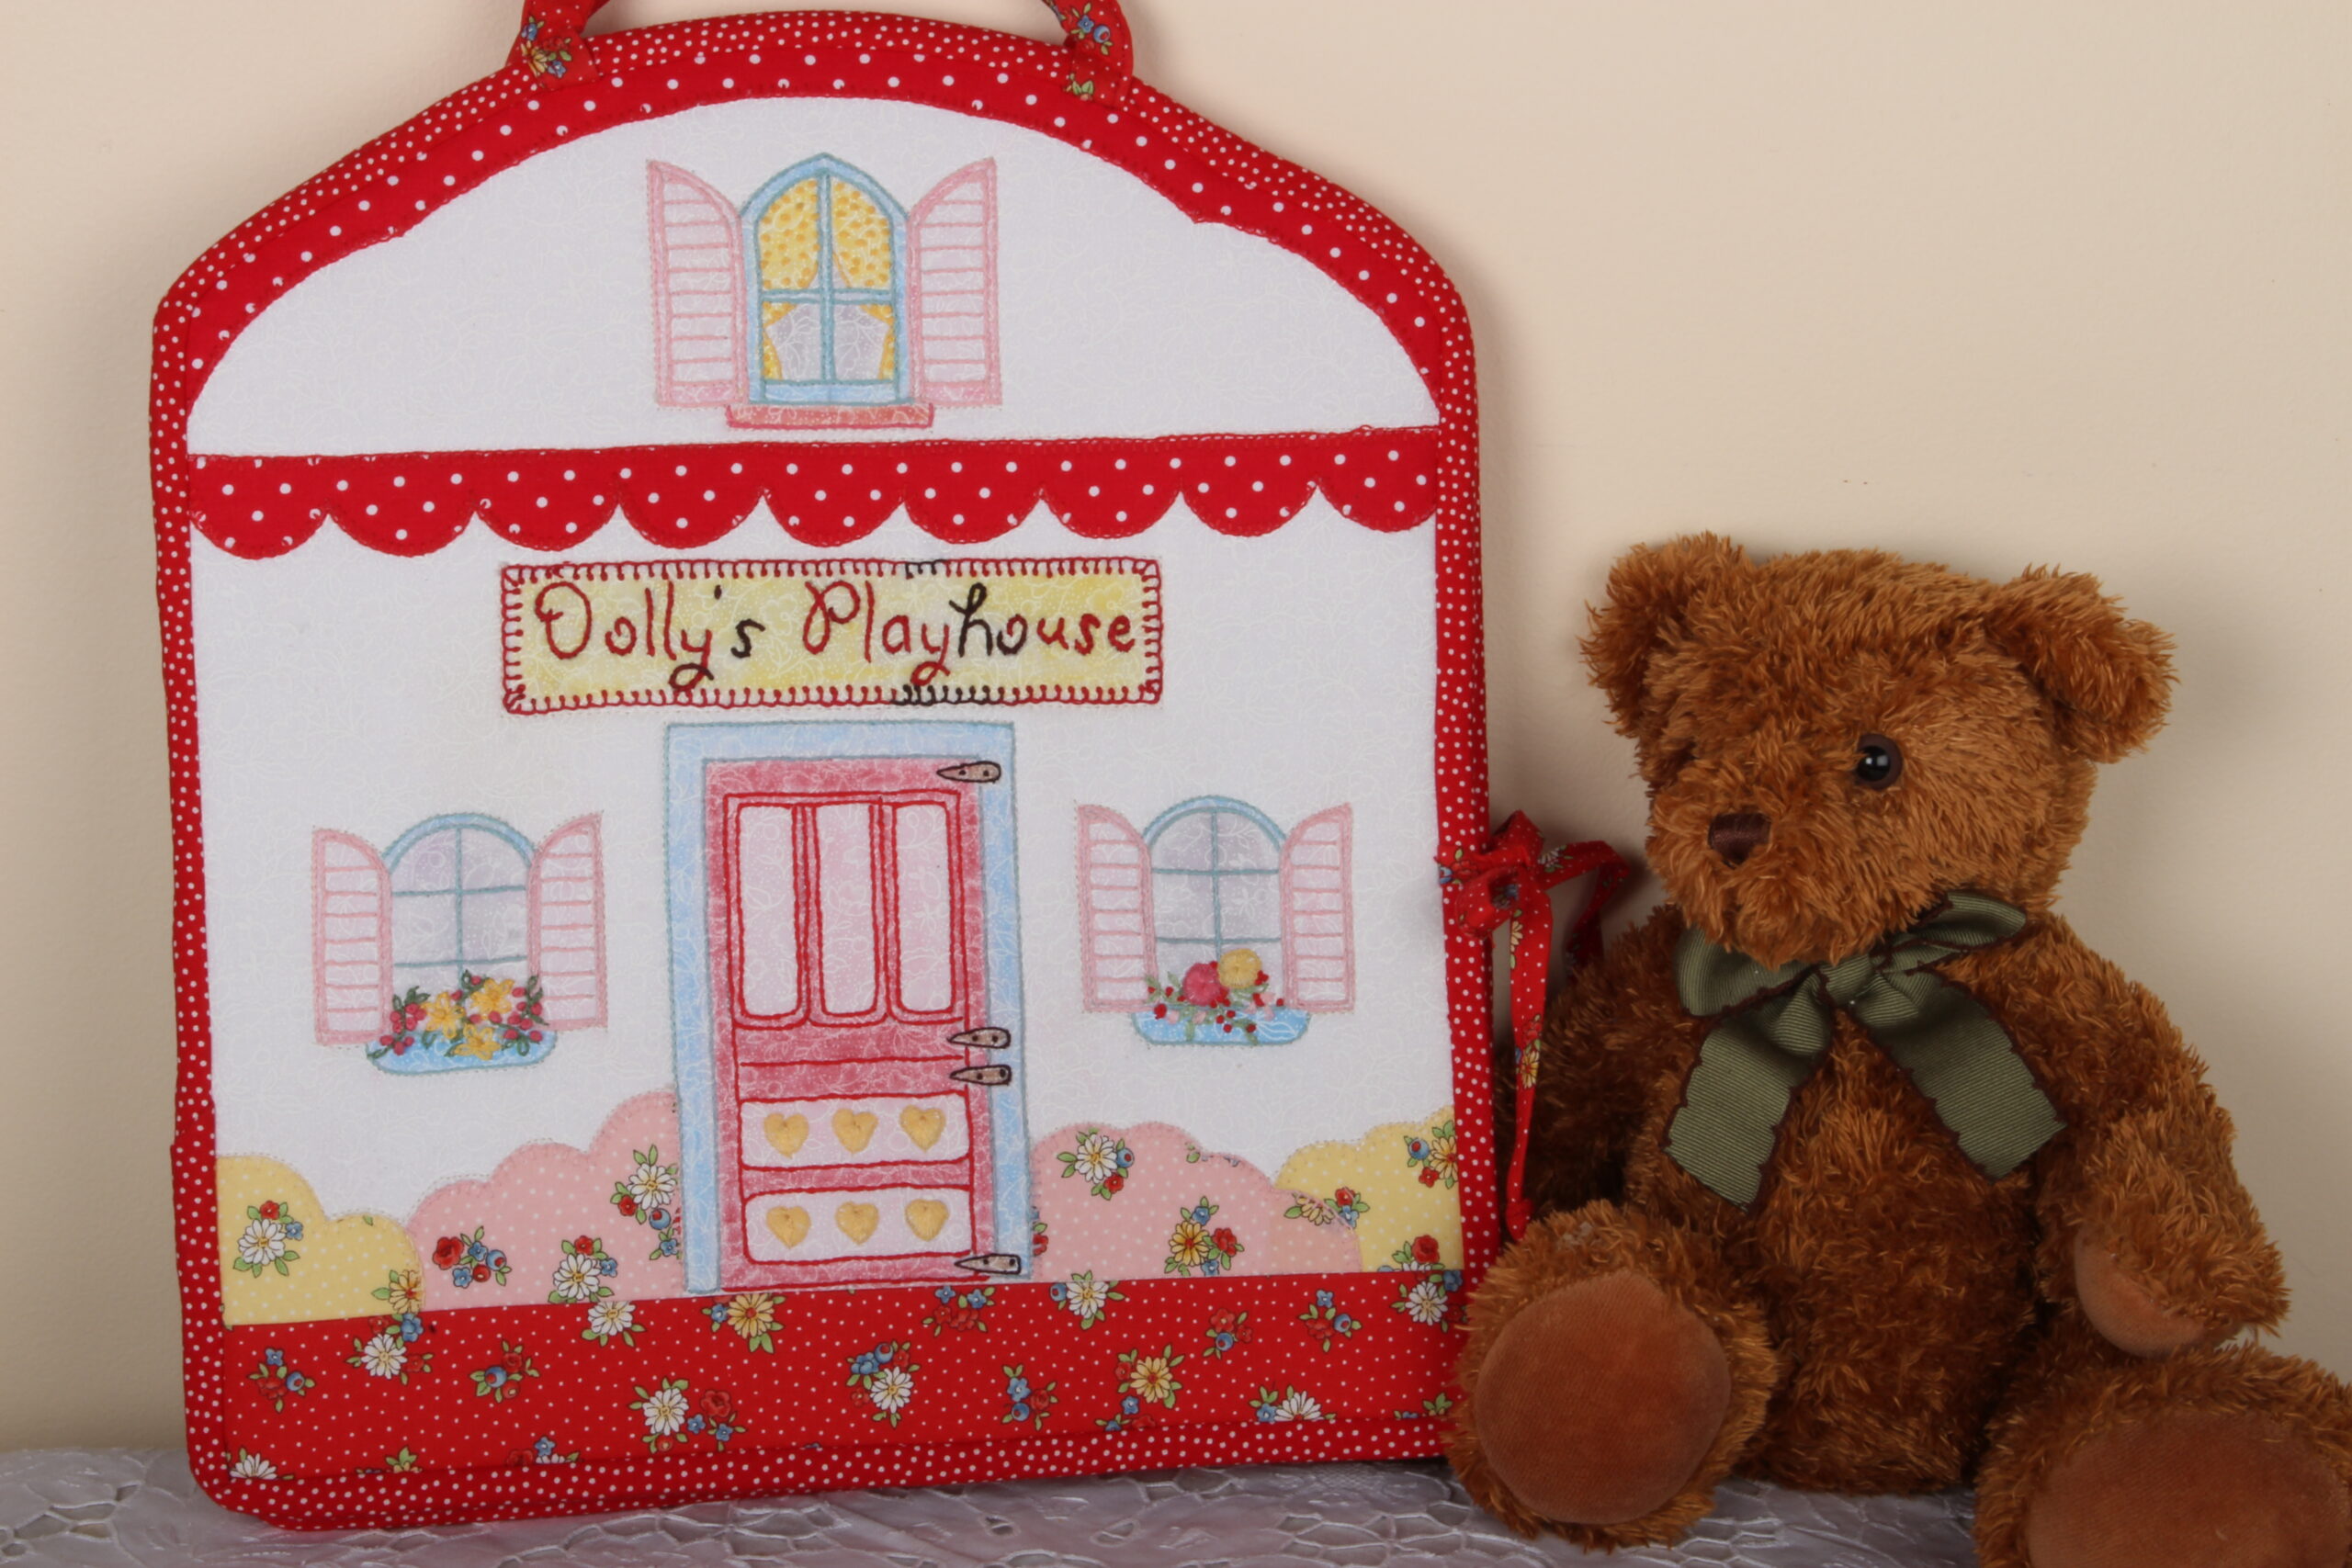 Dolly’s Playhouse